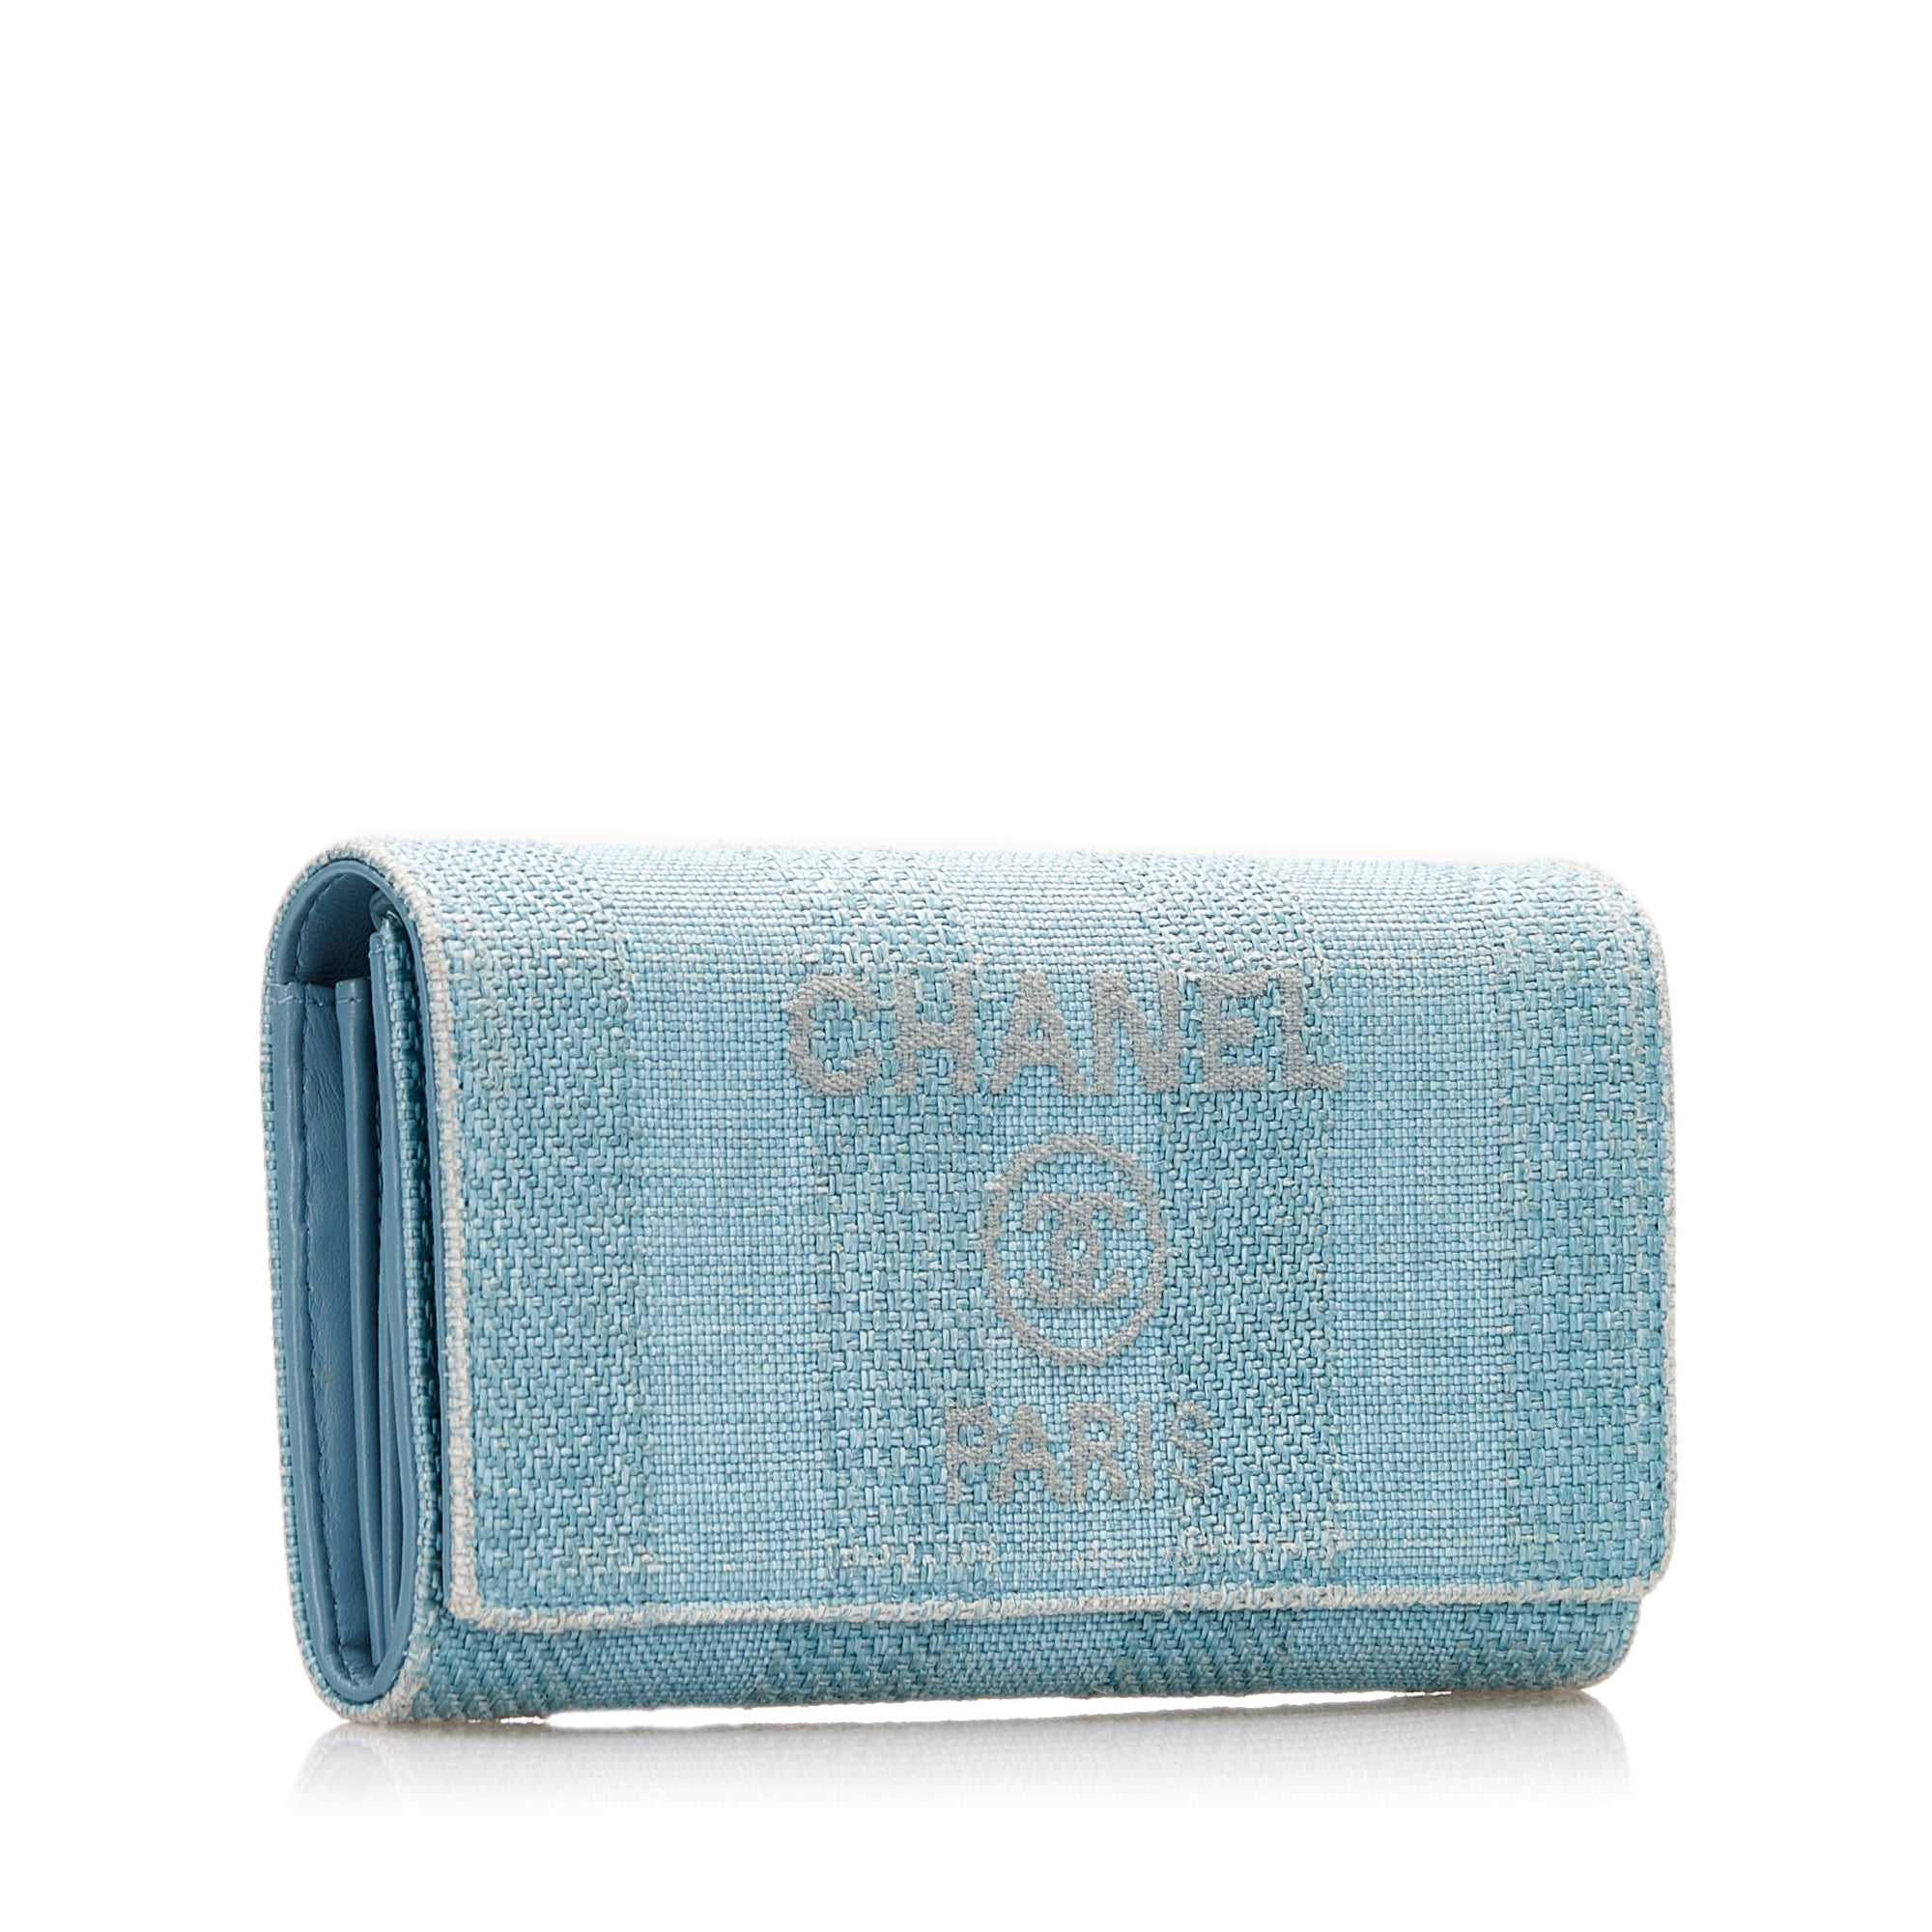 Chanel Deauville Tweed Blue